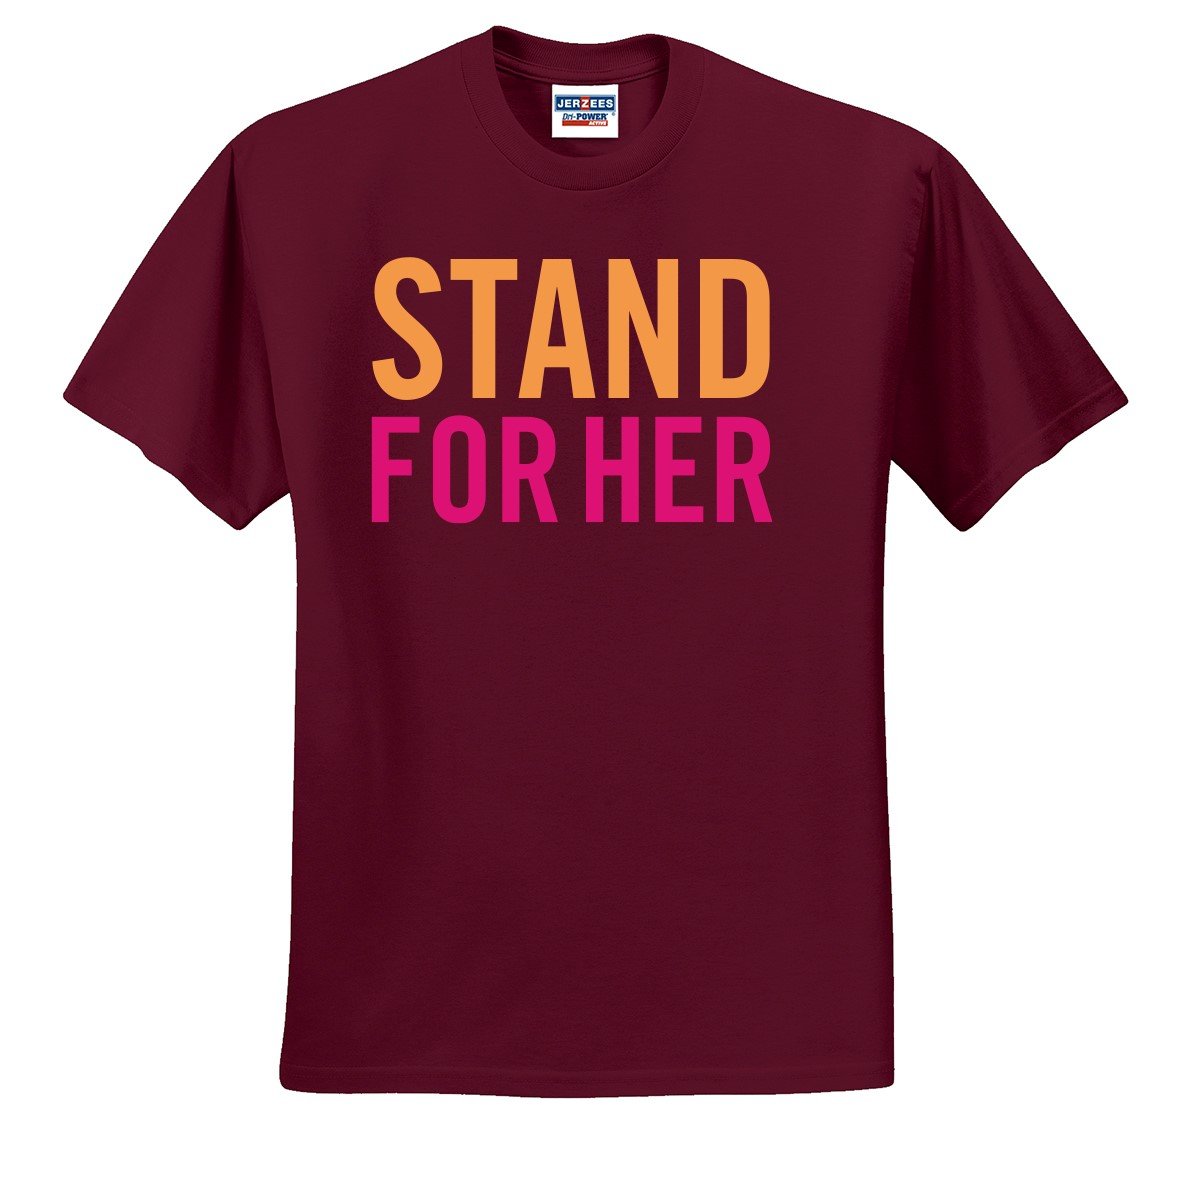 Stand forher Maroon front.jpg